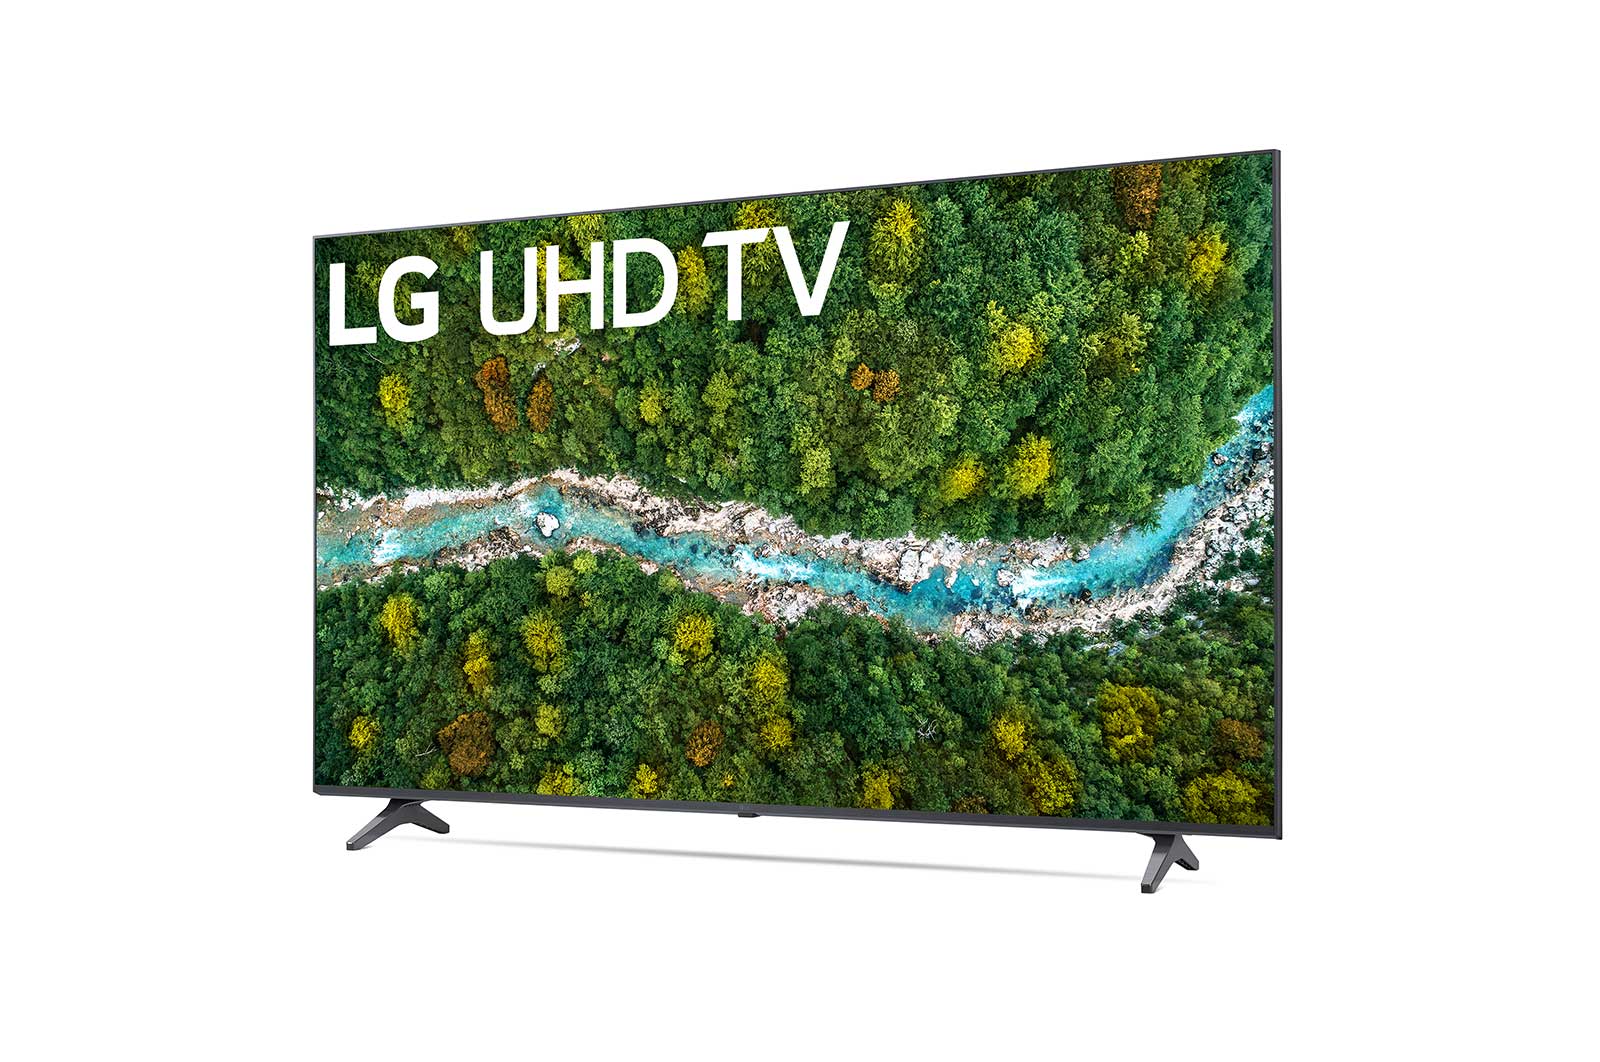 LG 55" 4K Smart UHD TV w/AI ThinQ(Refurbished) Tv's ONLY for delivery in San Diego and Tijuana